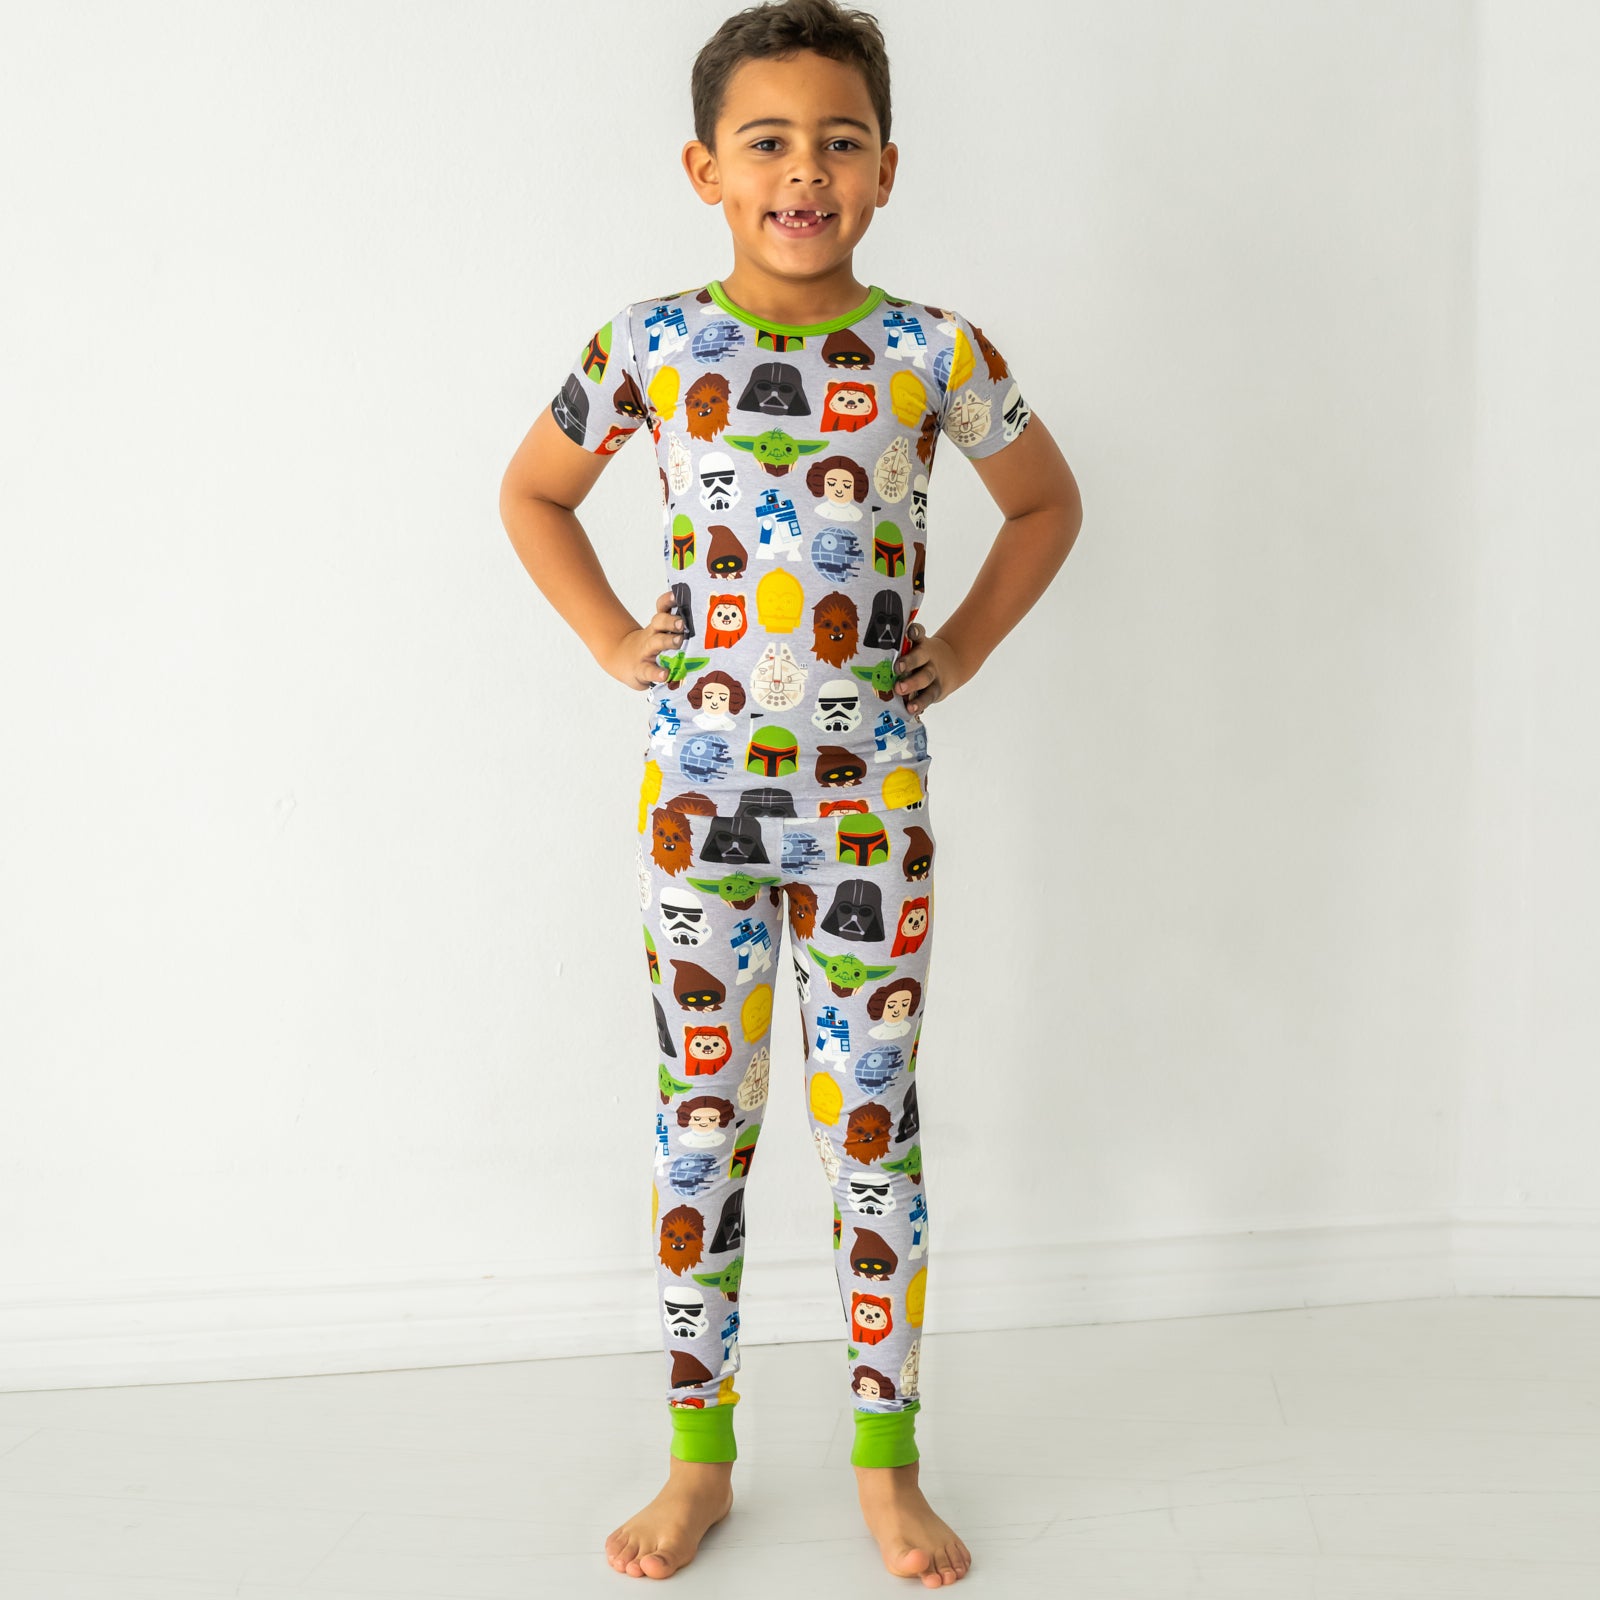 Alternate image of a child wearing a Legends of the Galaxy two-piece short sleeve pajama set